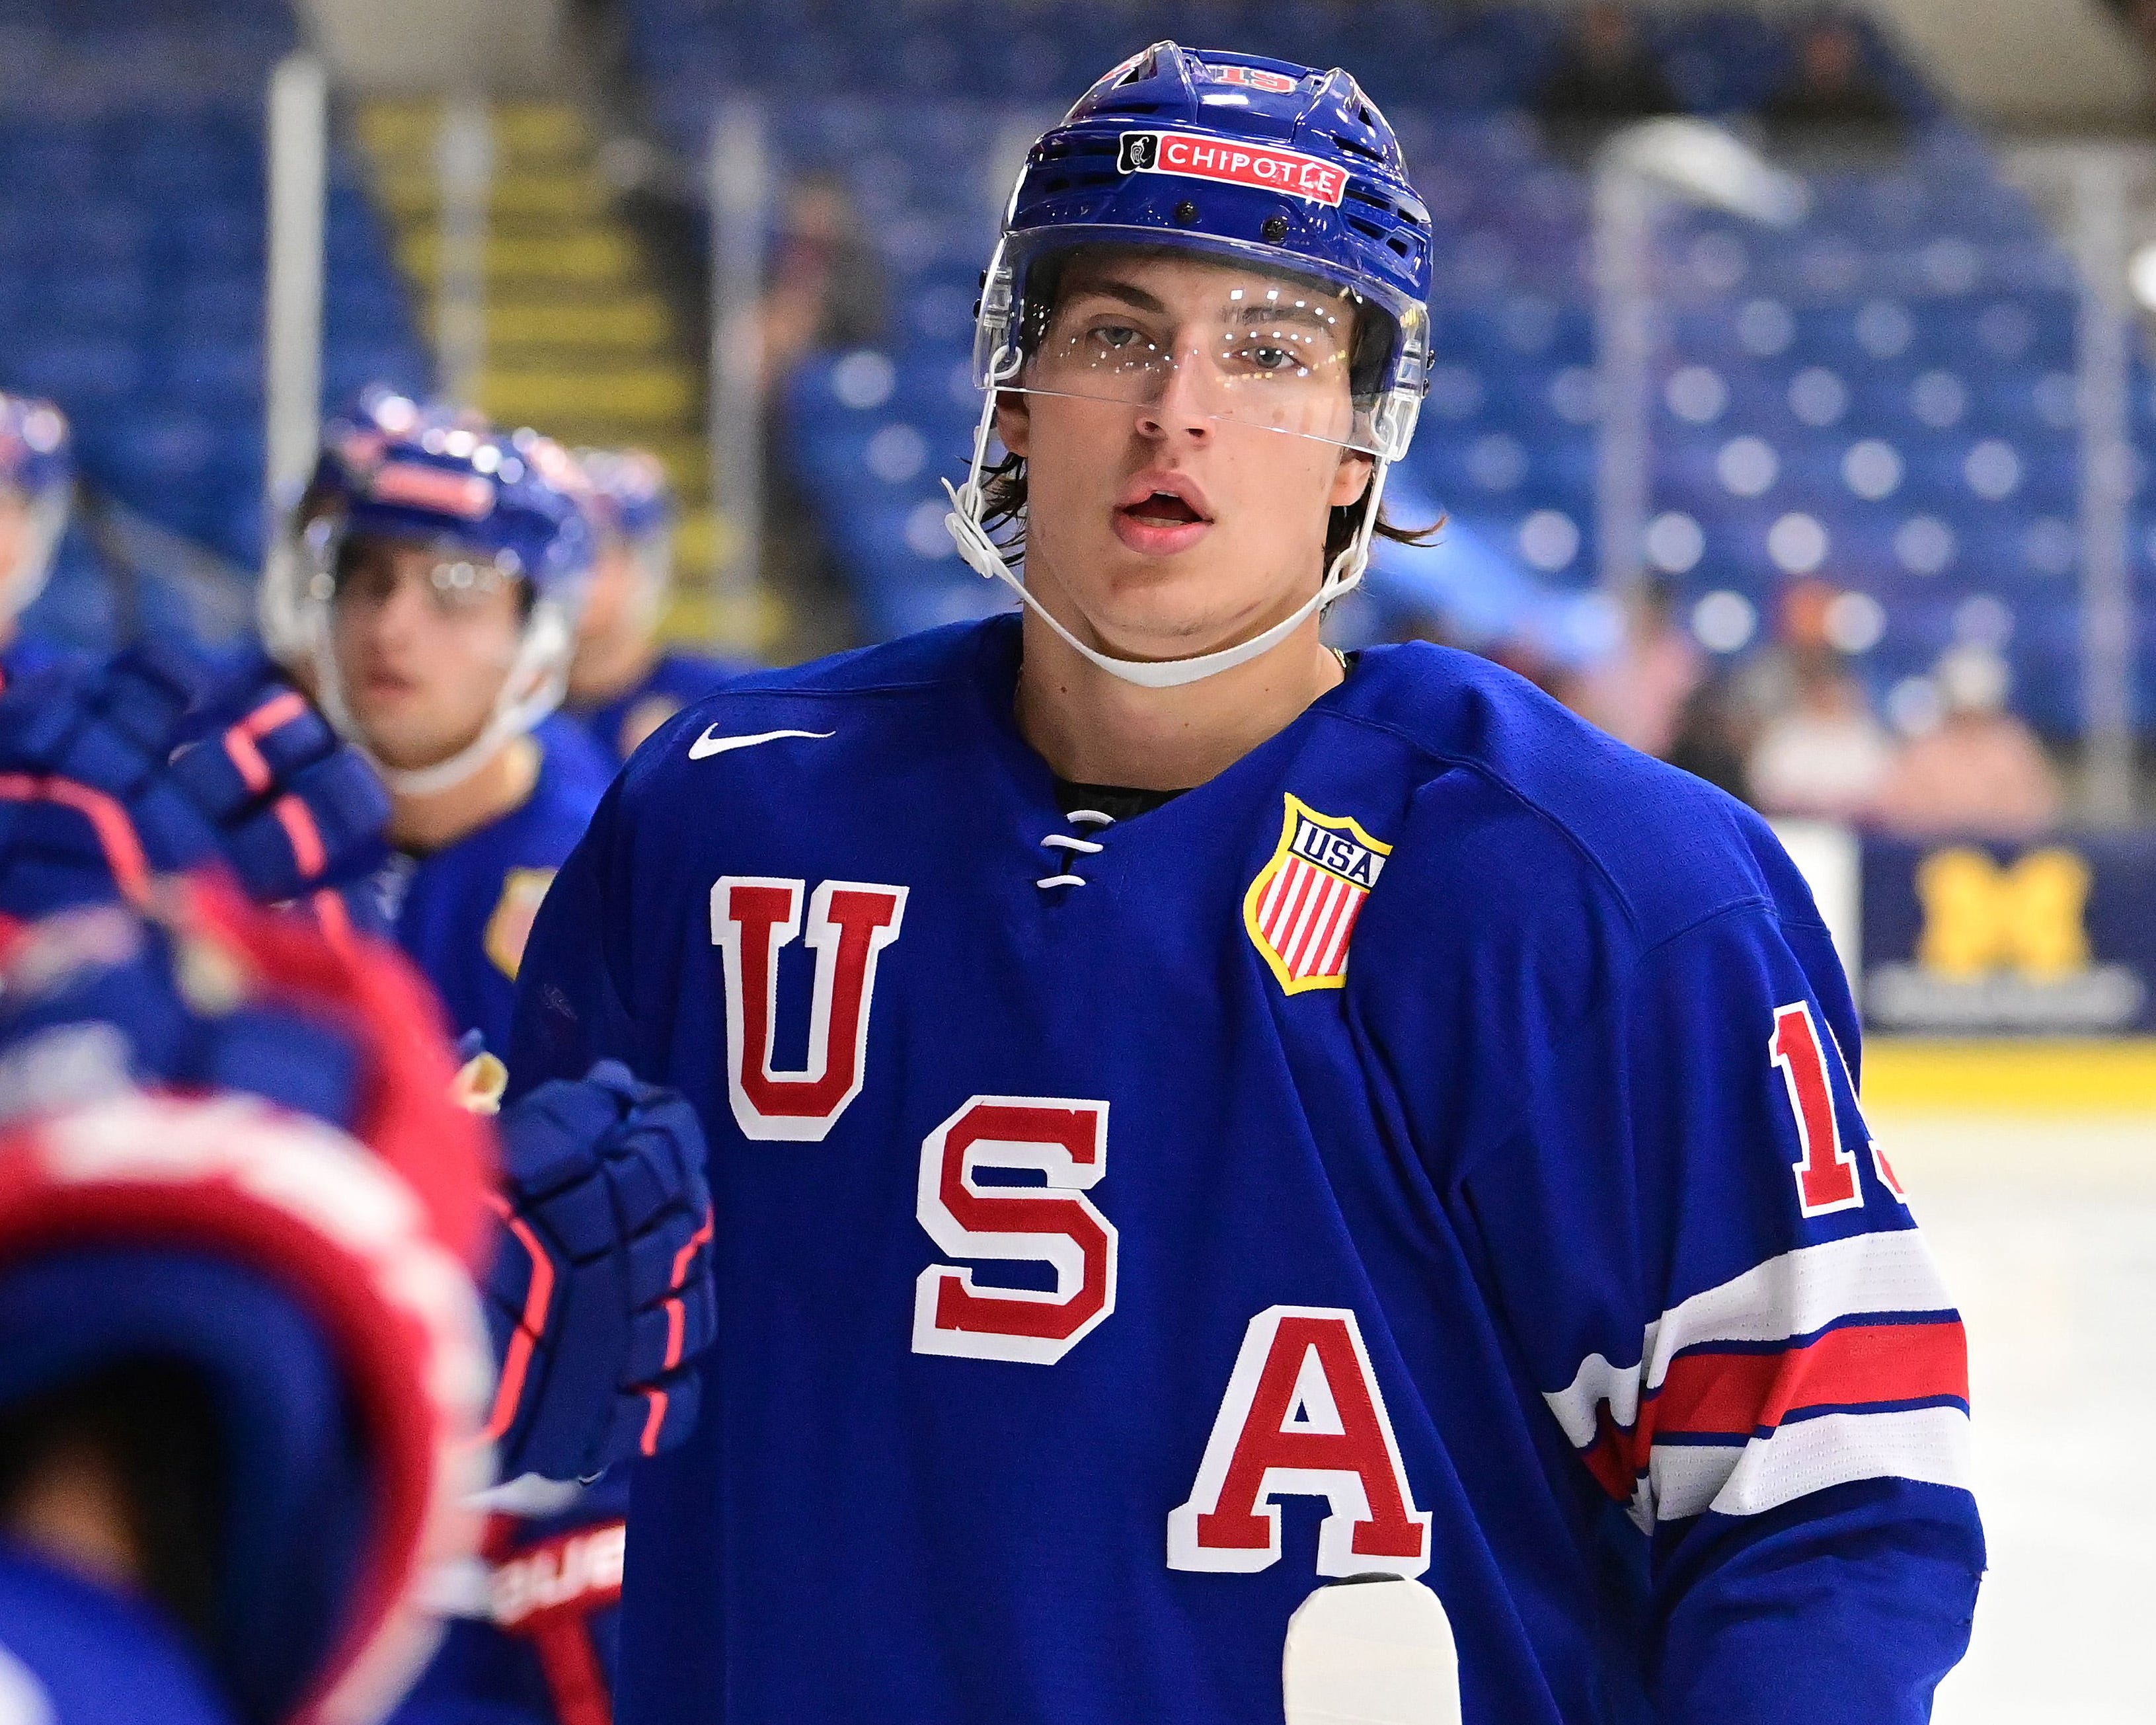 Source: Hughes, 17, commits to play for U.S. - ESPN